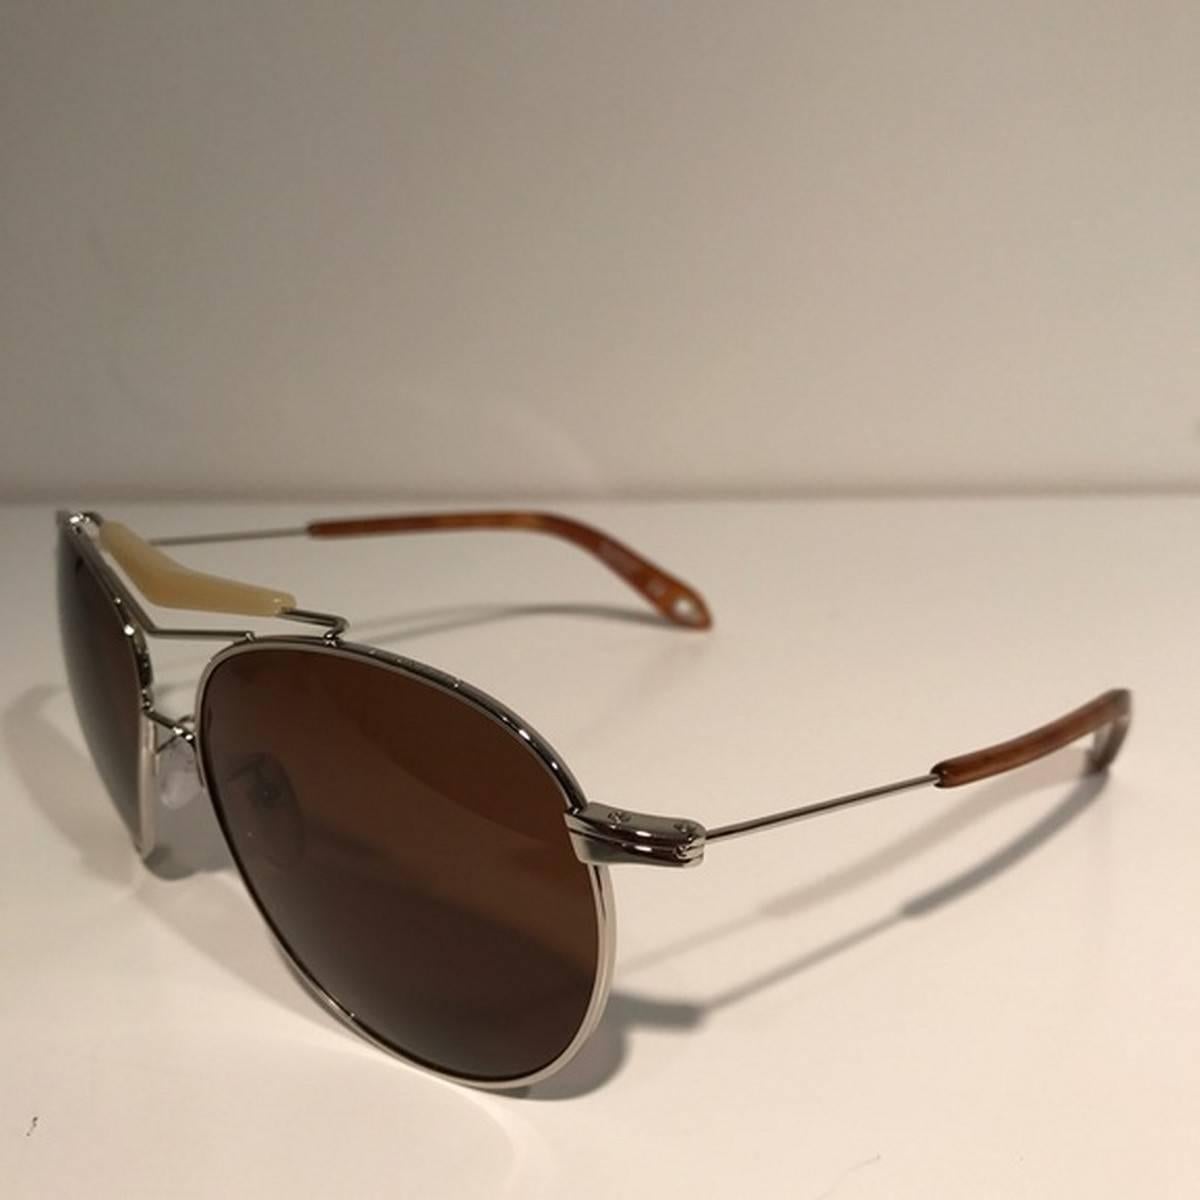 Givenchy Silver Aviator Sunglasses
Color: Silver/Brown
Size: OS

Brand new with box.
Unused condition.
No flaws.
Made in Italy.